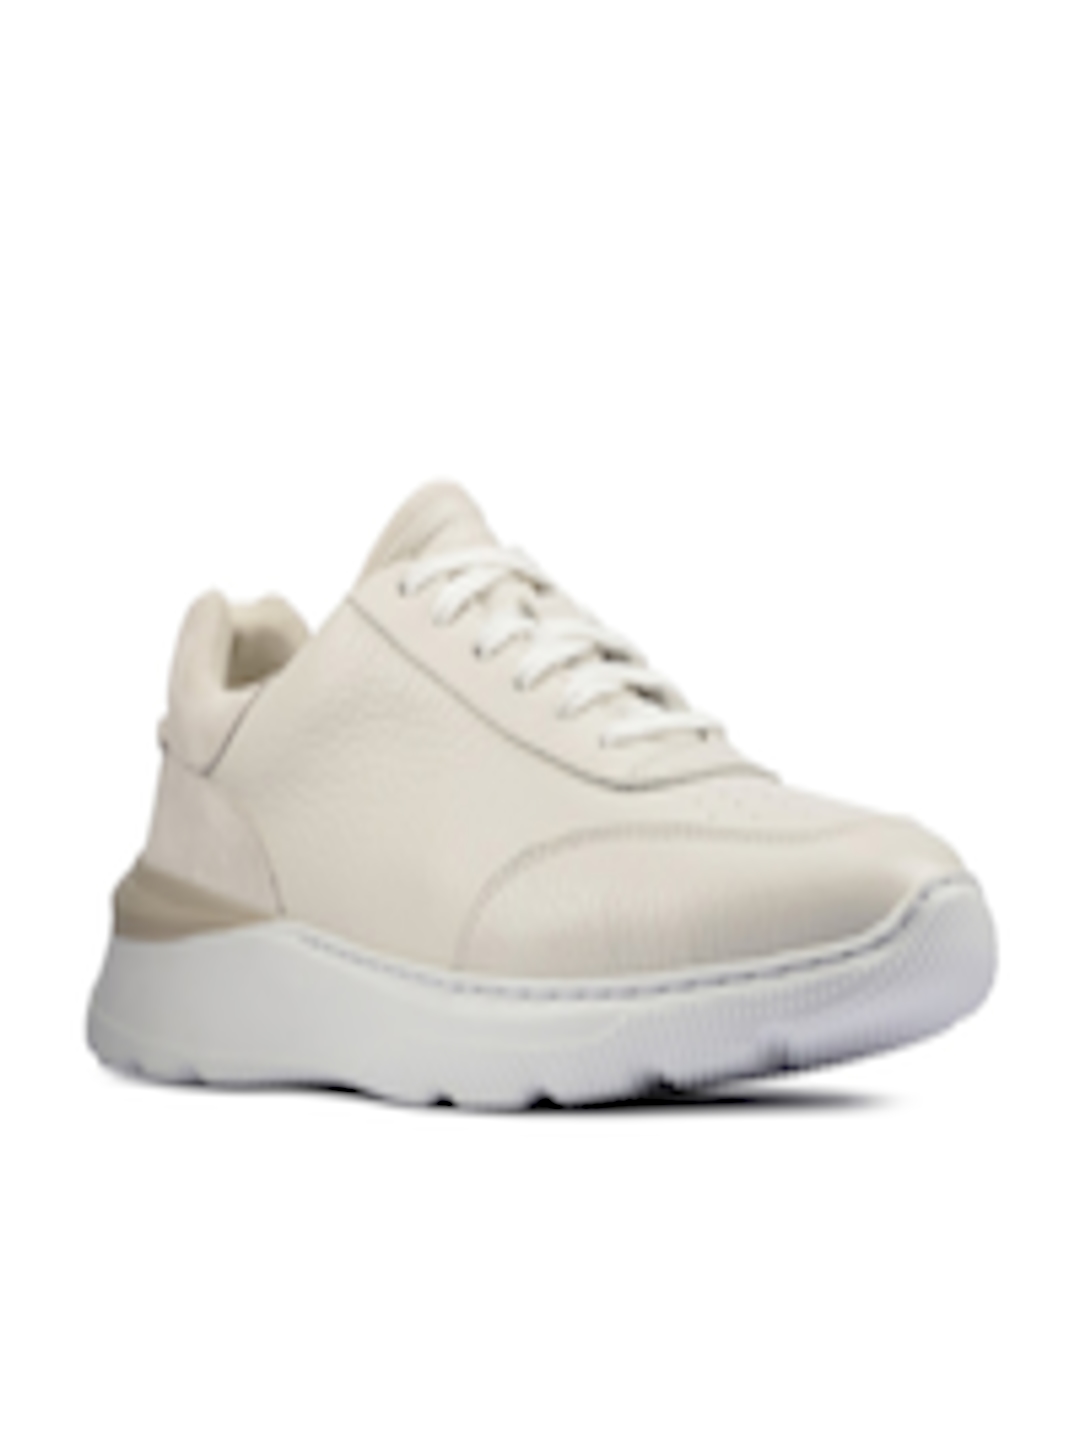 Buy Clarks Men White Solid Leather Sneakers - Casual Shoes for Men ...